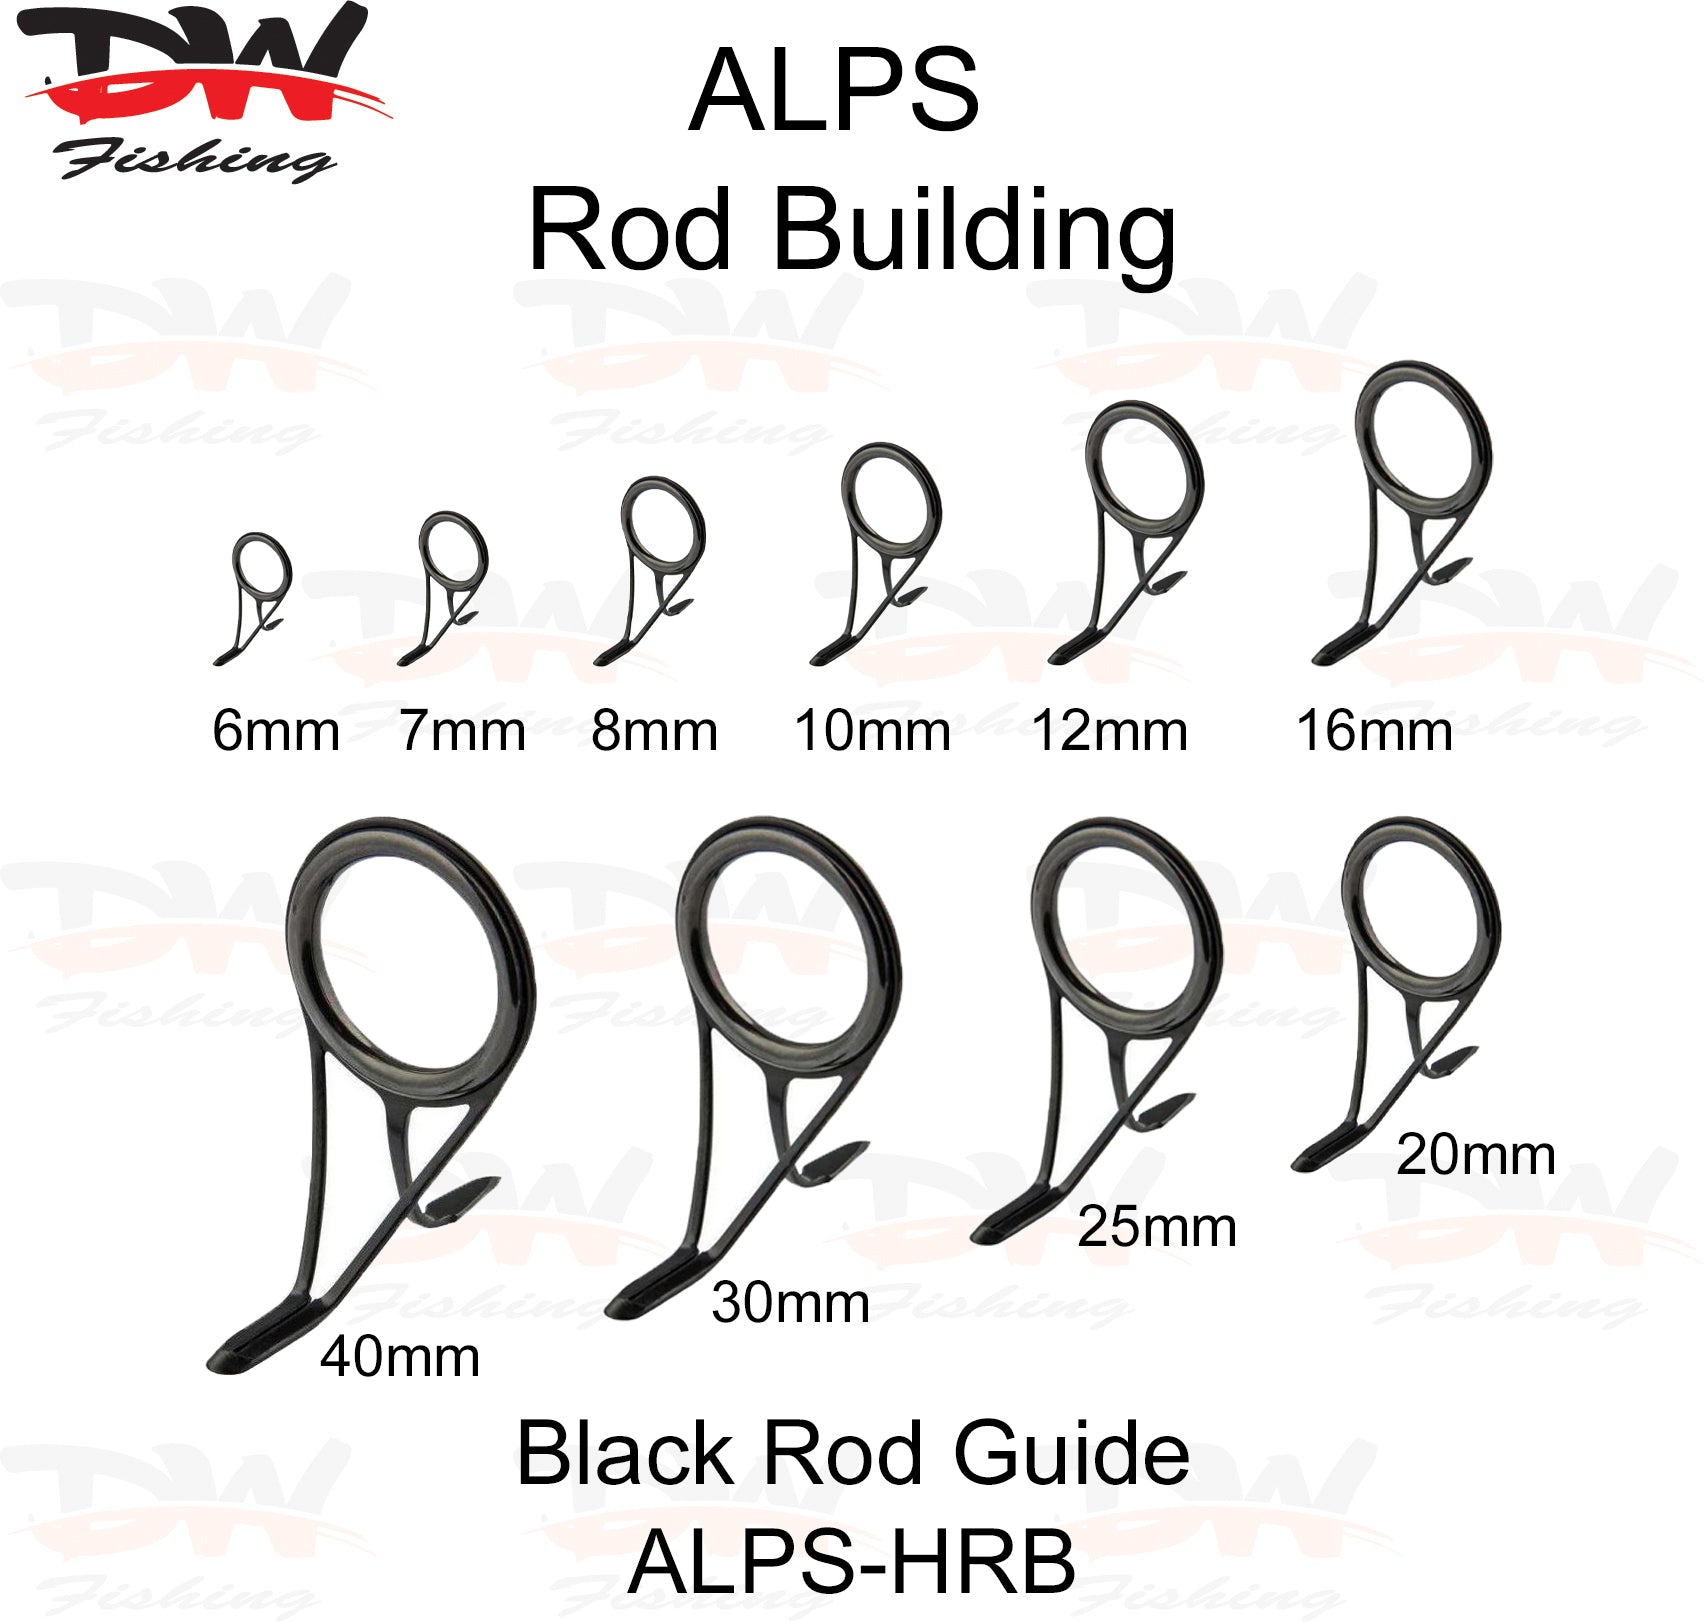 ALPS Rod Guide Stainless Steel, Rod Building